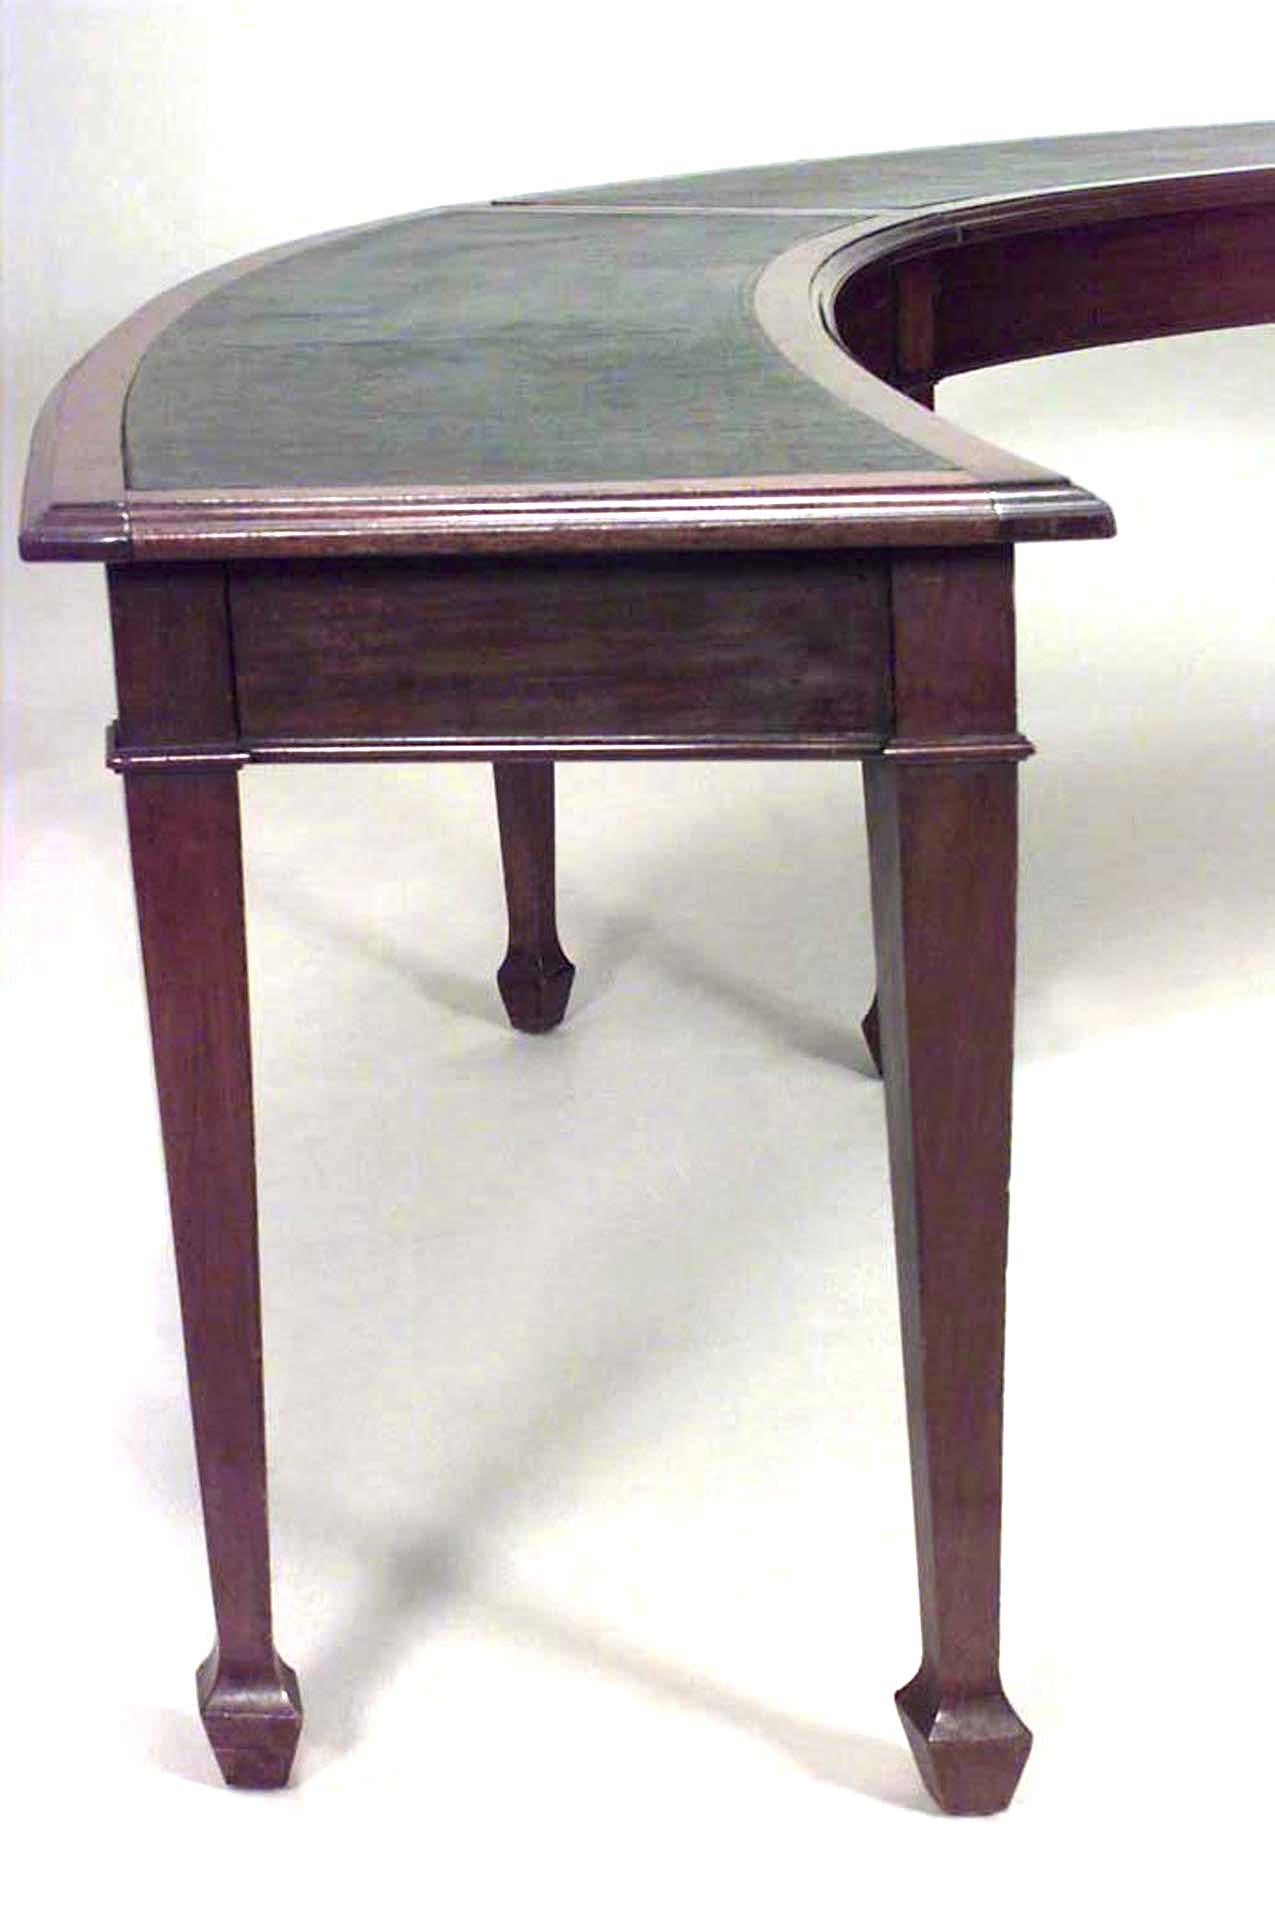 English Sheraton-style (19th Century) large mahogany 4 section horseshoe shaped hunt/conference table with black leather top.
